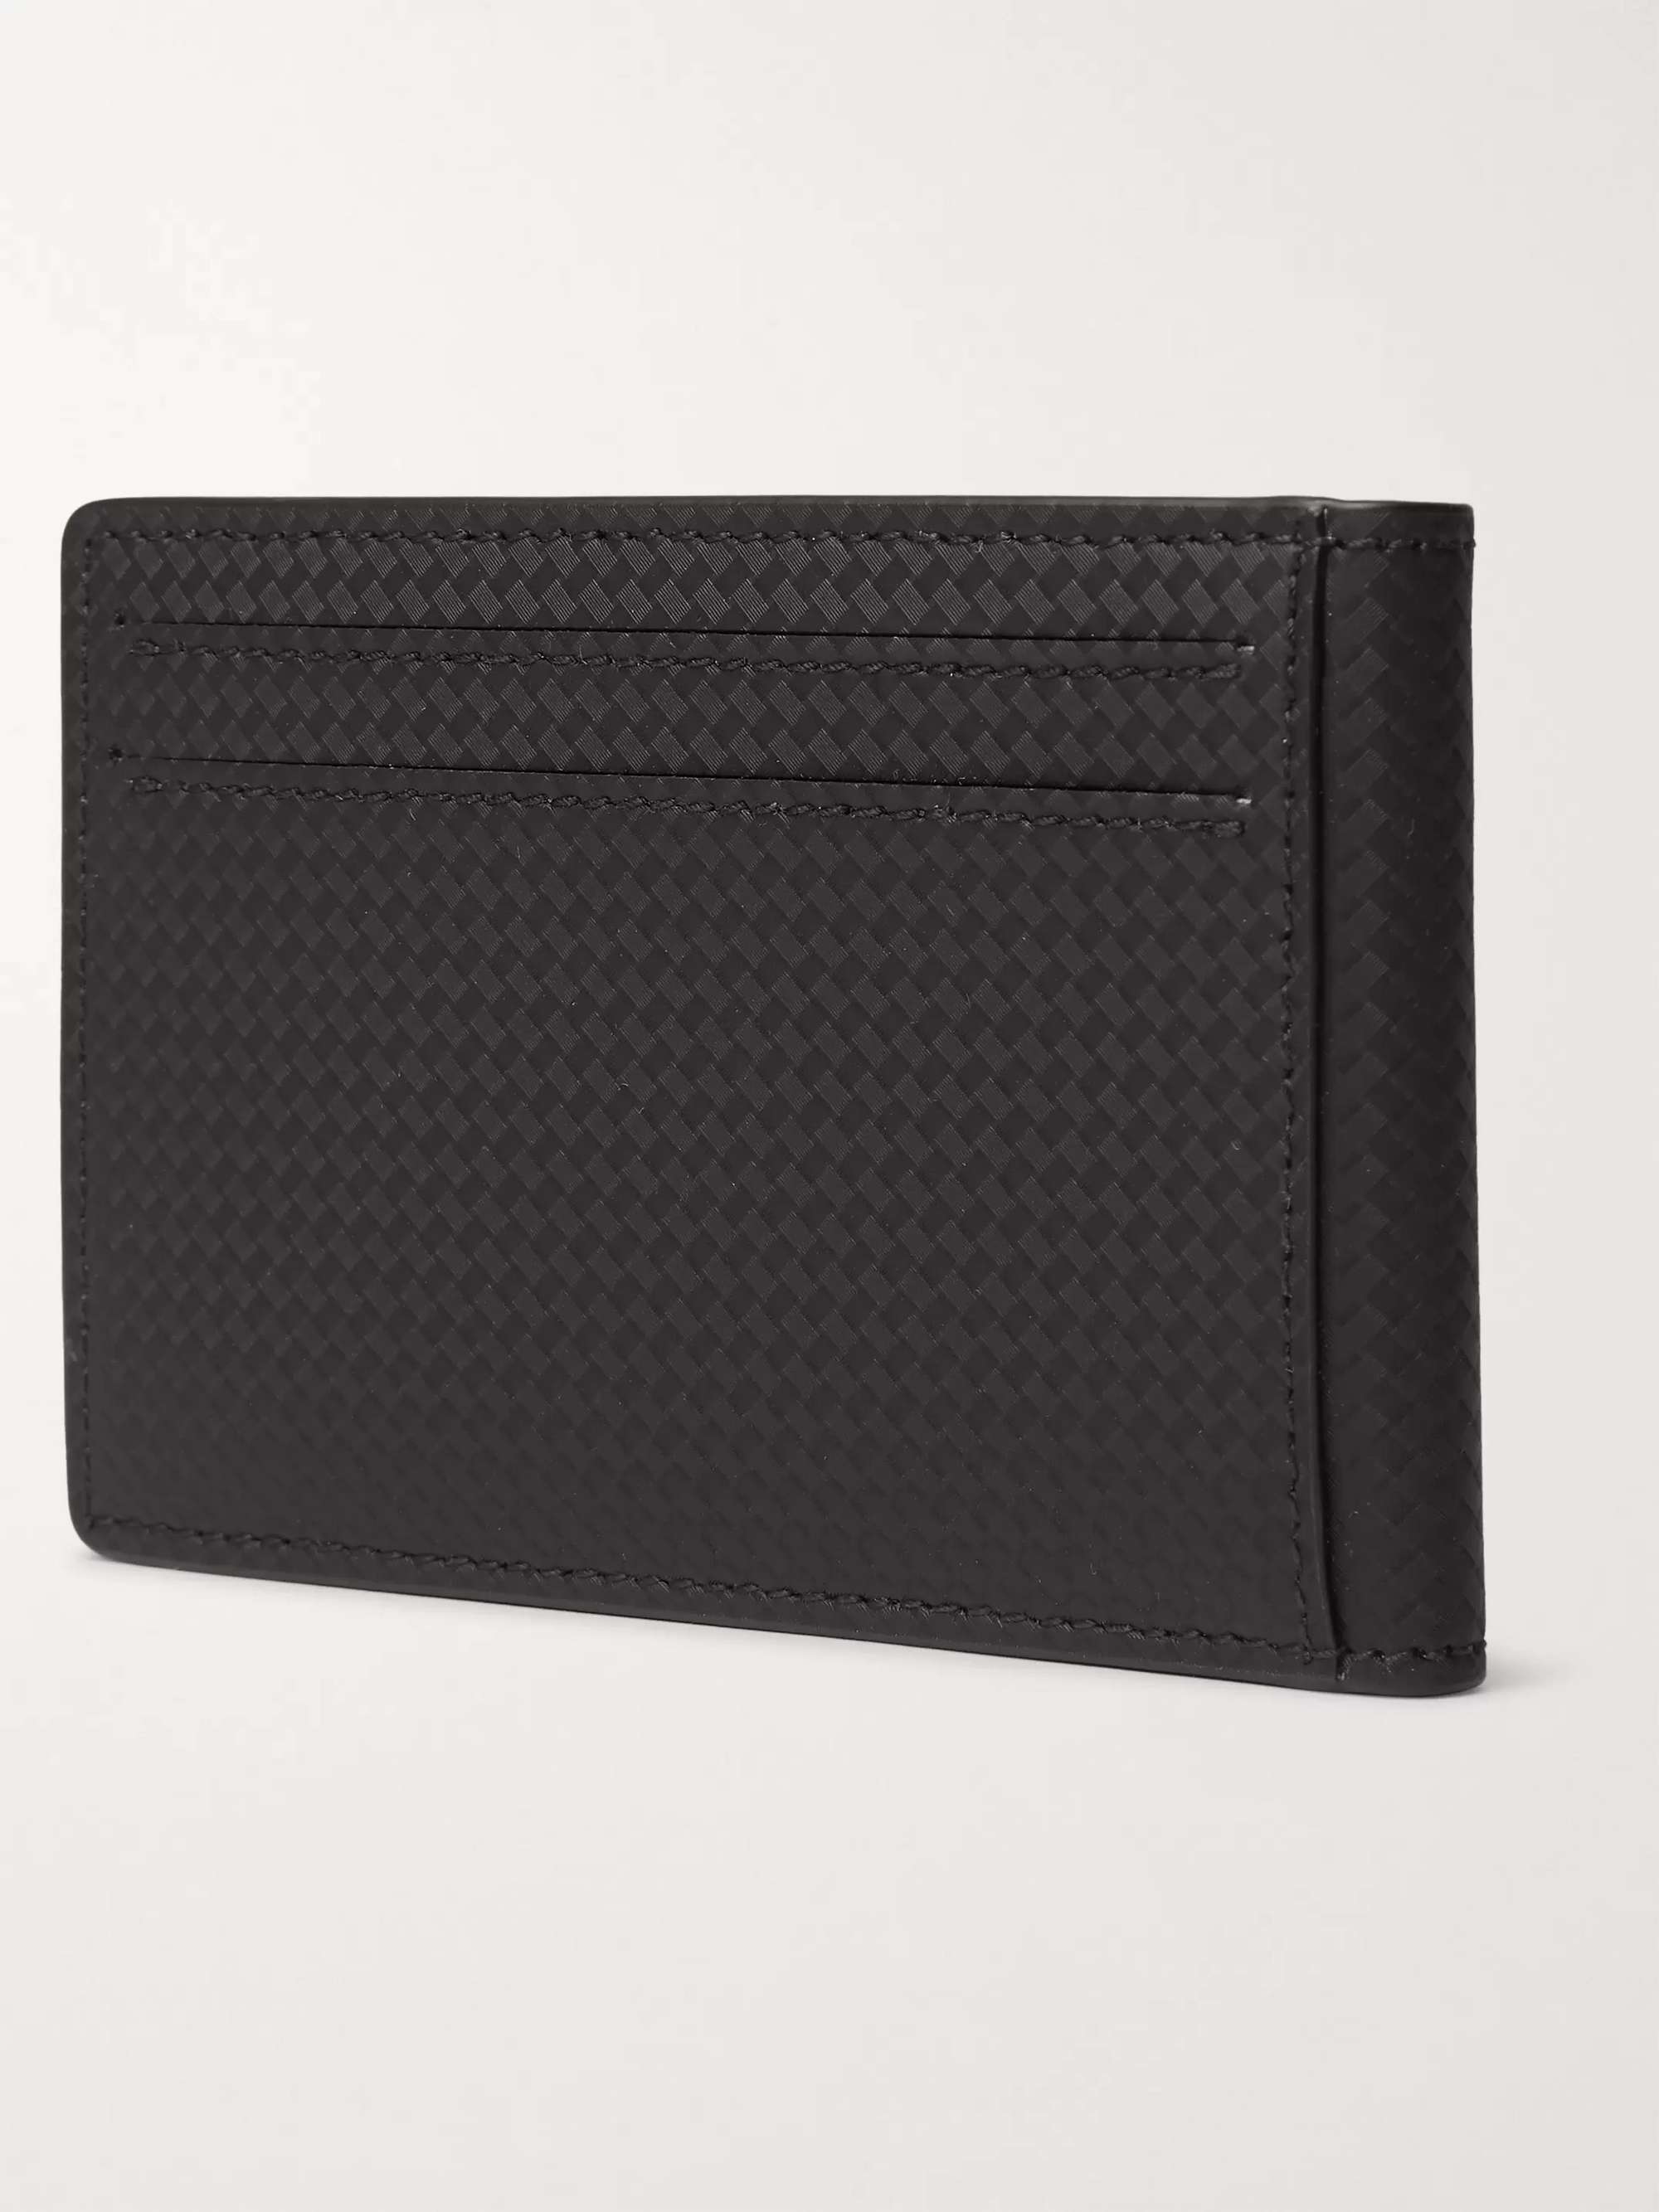 MONTBLANC Extreme 2.0 Textured-Leather Cardholder